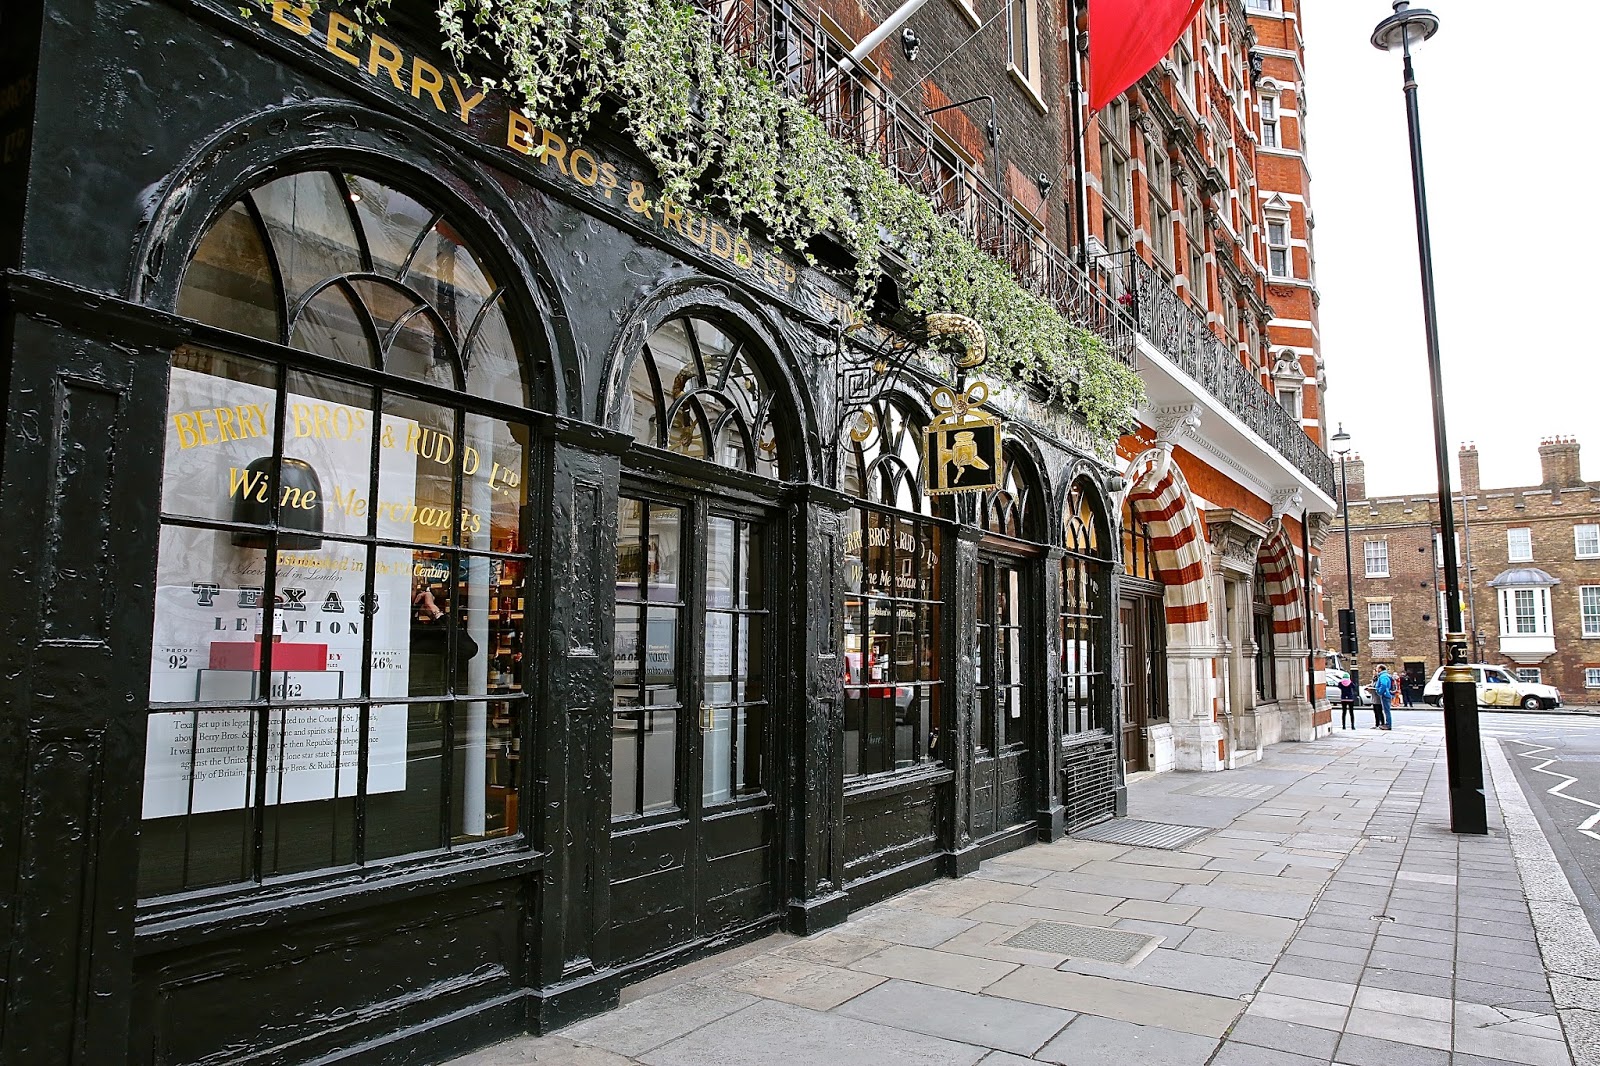 The London Foodie: Rediscovering London's St James - Food, History and